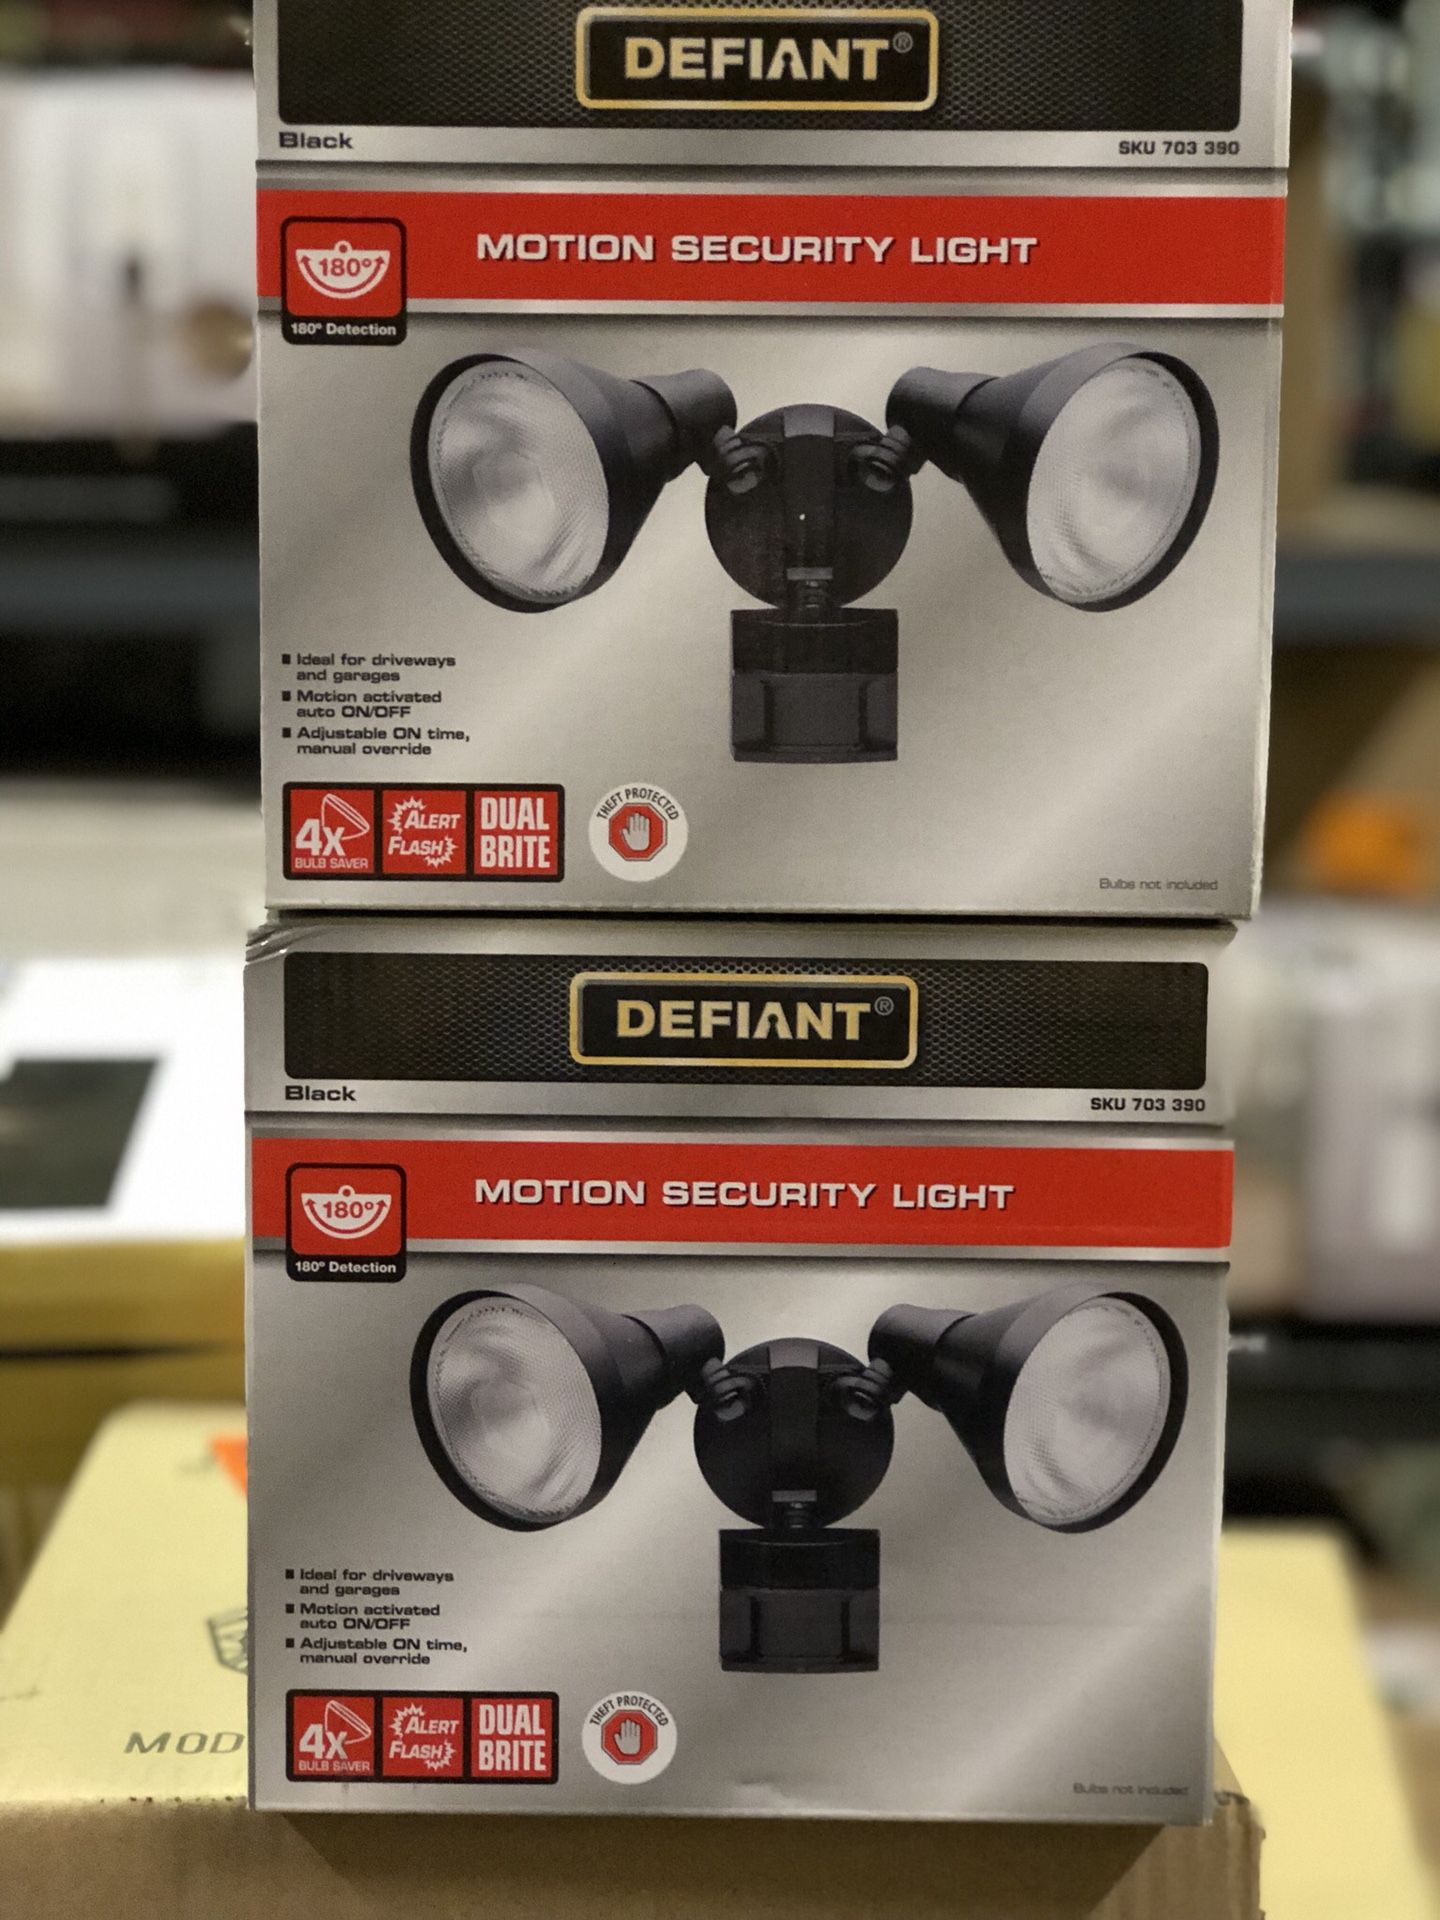 Defiant 180 Degree Black Motion-Sensing Outdoor Security Light- NEW IN BOX- 2 for $40